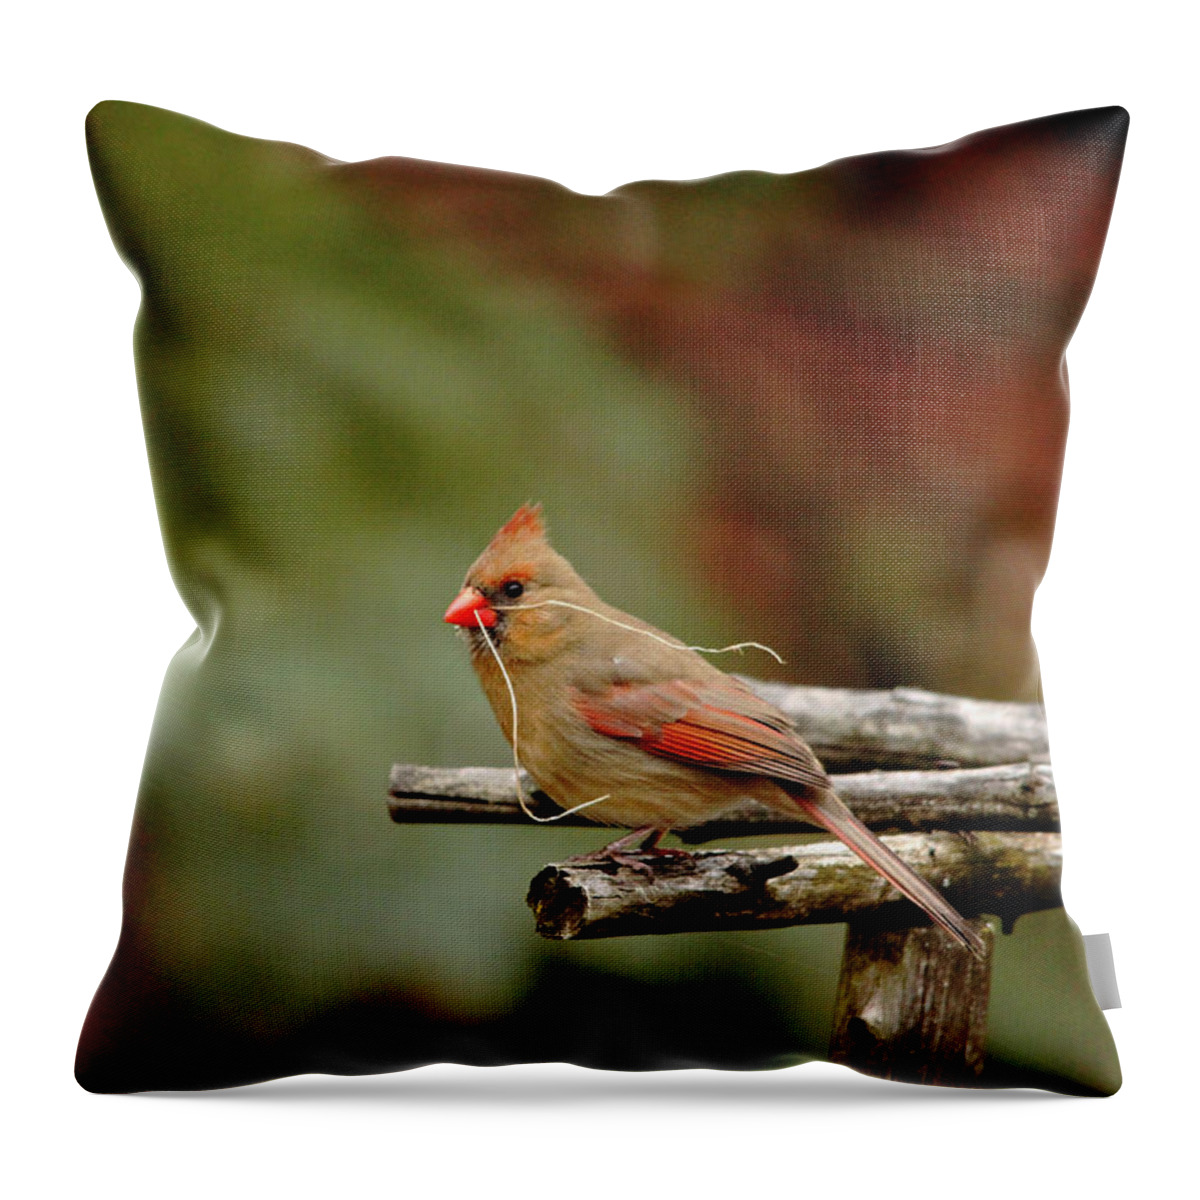 Northern Red Cardinal Throw Pillow featuring the photograph Building A Home by Debbie Oppermann